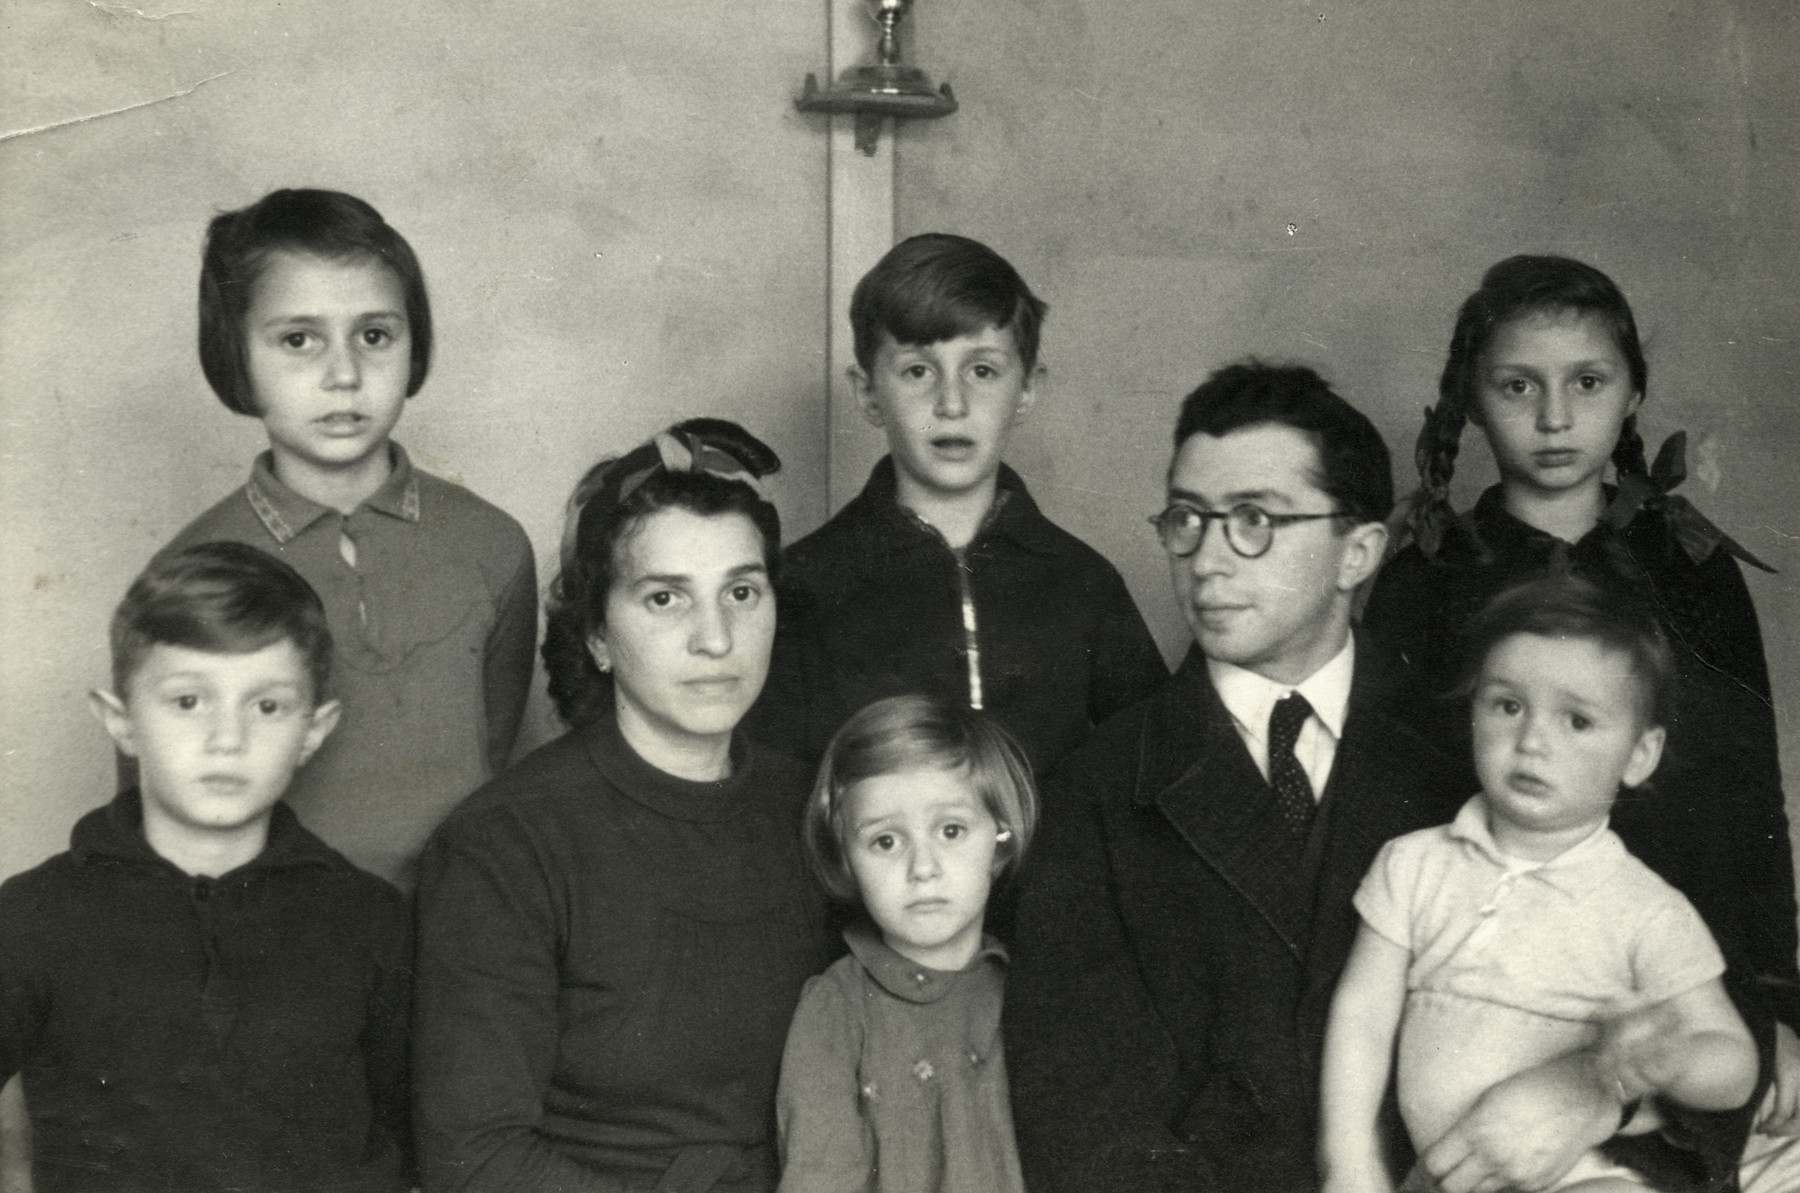 Portrait of the entire Birnbaum family in Westerbork. 

Pictured from left to right are Zvi, Sonni, Hennie, Yaakov, Susy, Yehoshua, Regina and Shmuel.